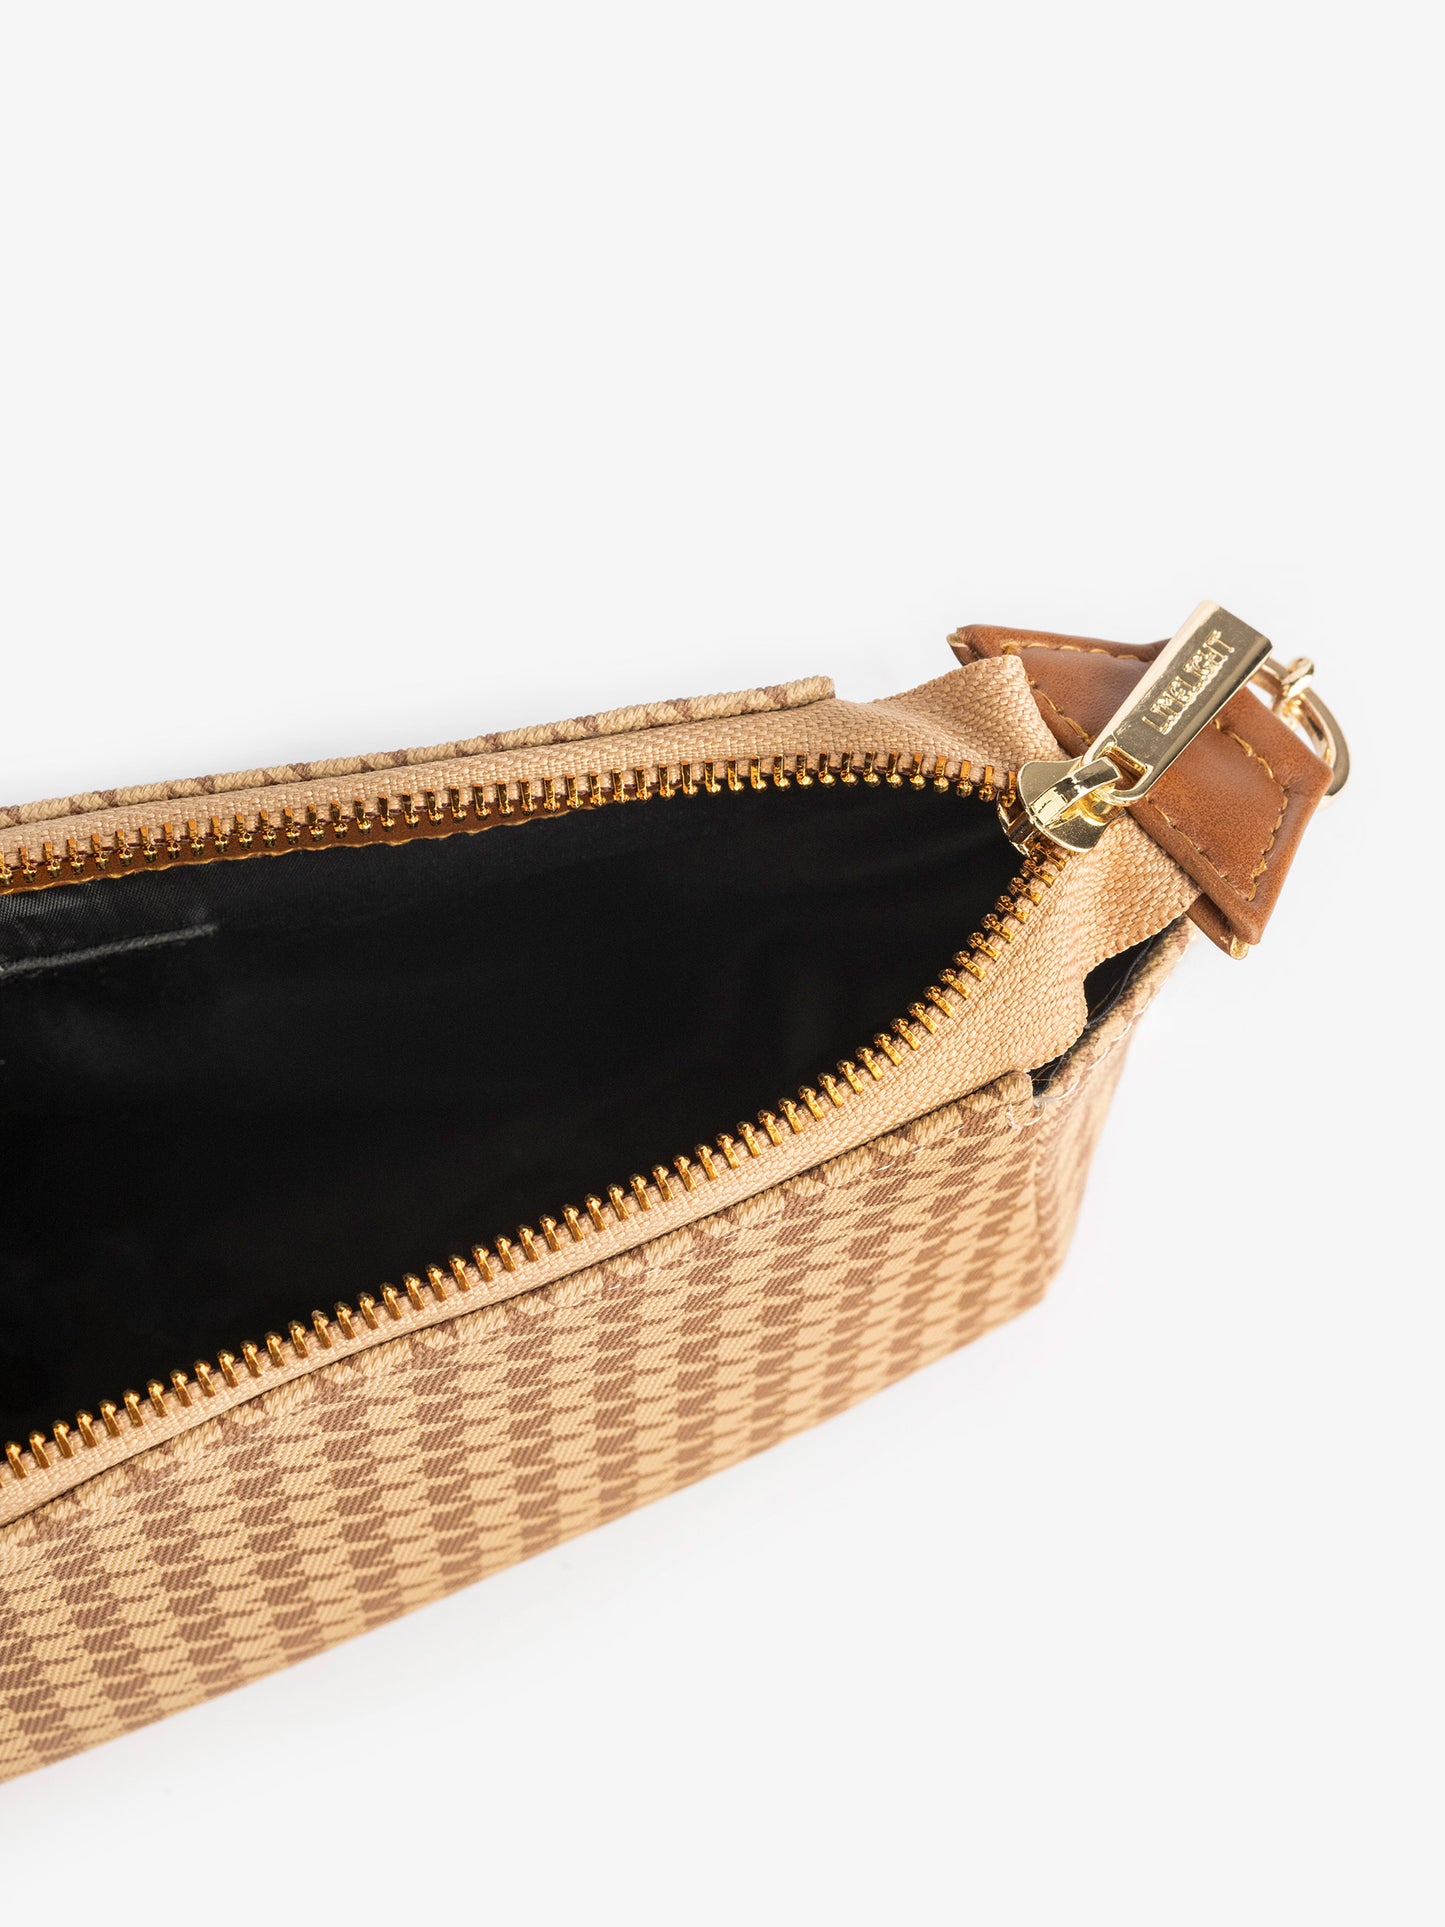 Hounds tooth Printed Clutch